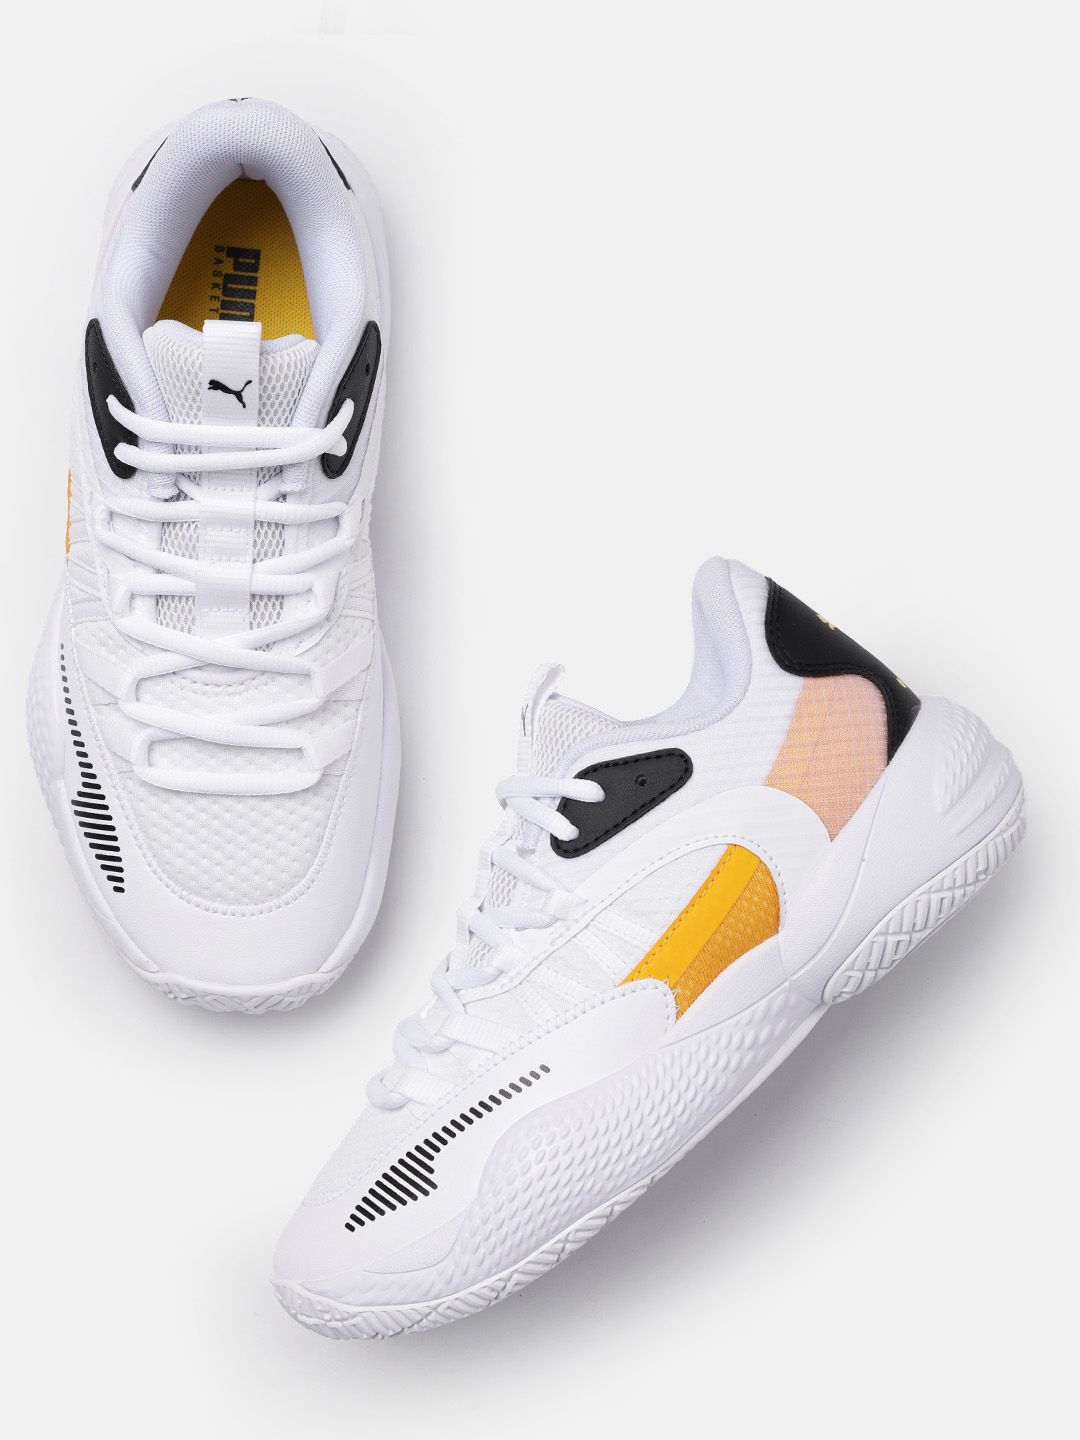 Puma Unisex Court Rider 2.0 Basketball Shoes Price in India